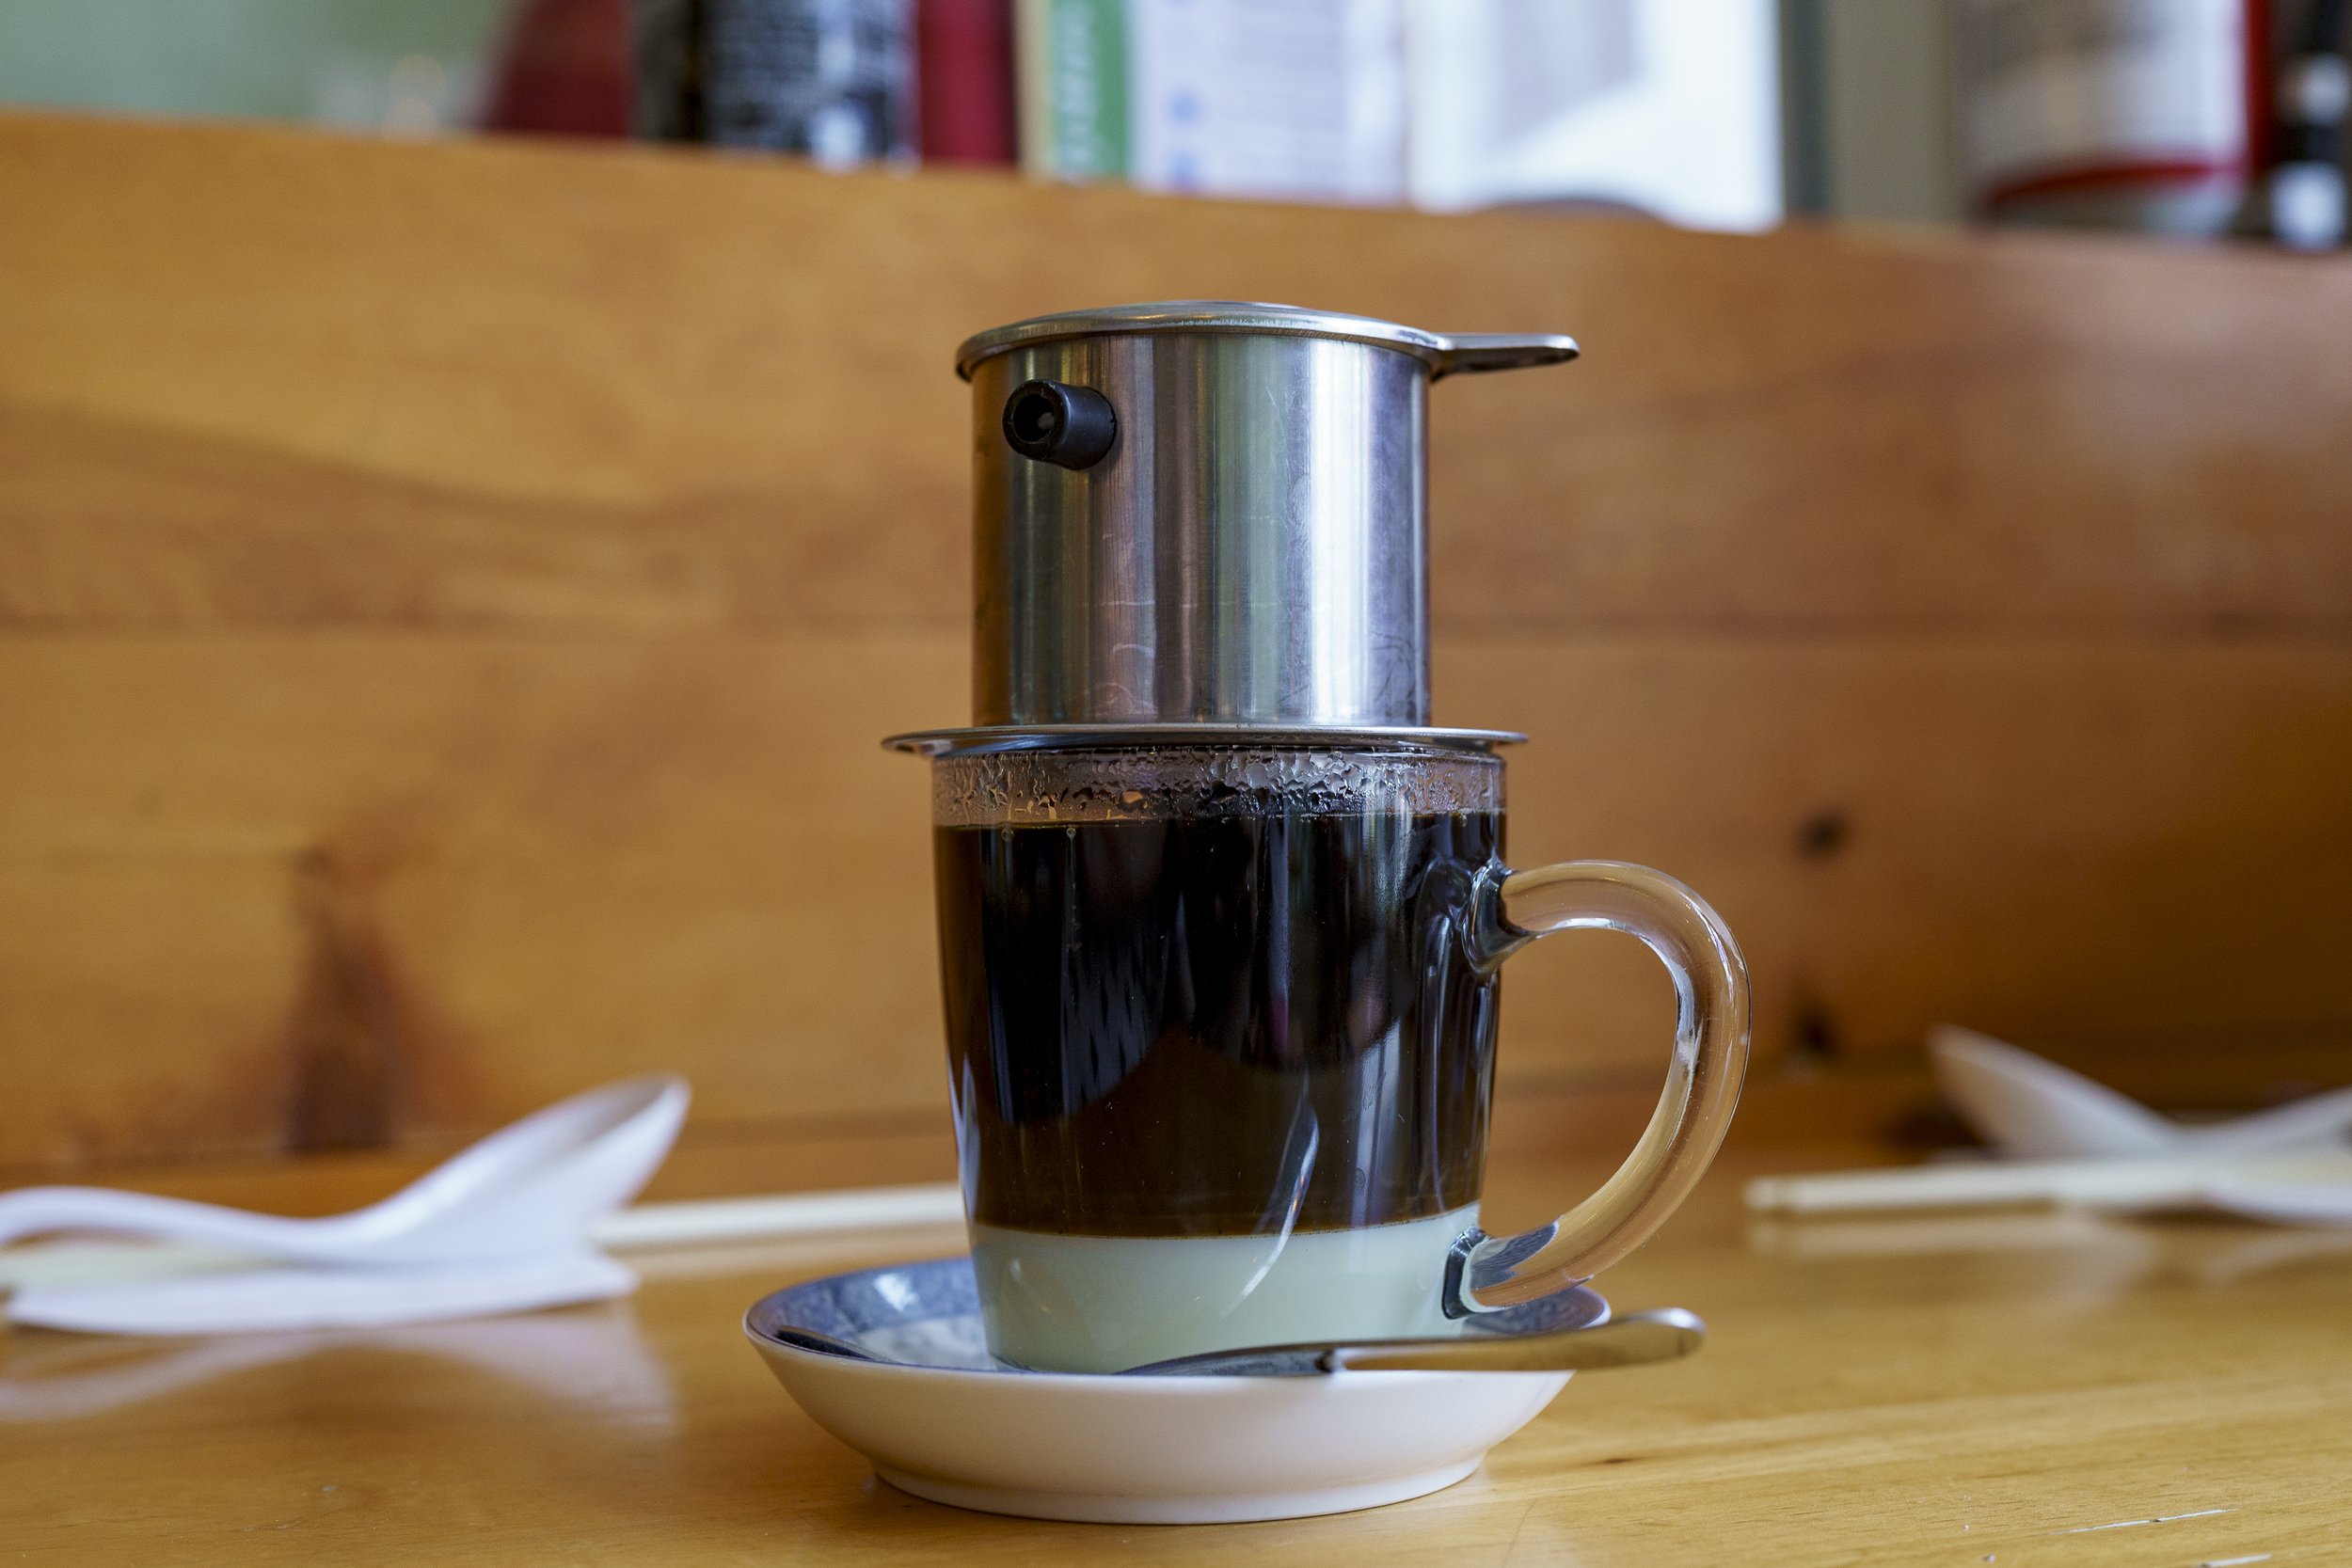  Vietnamese coffee is typically sweetened with condensed milk as the coffee is steeped over it before being mixed. Photo by Luke Best. 